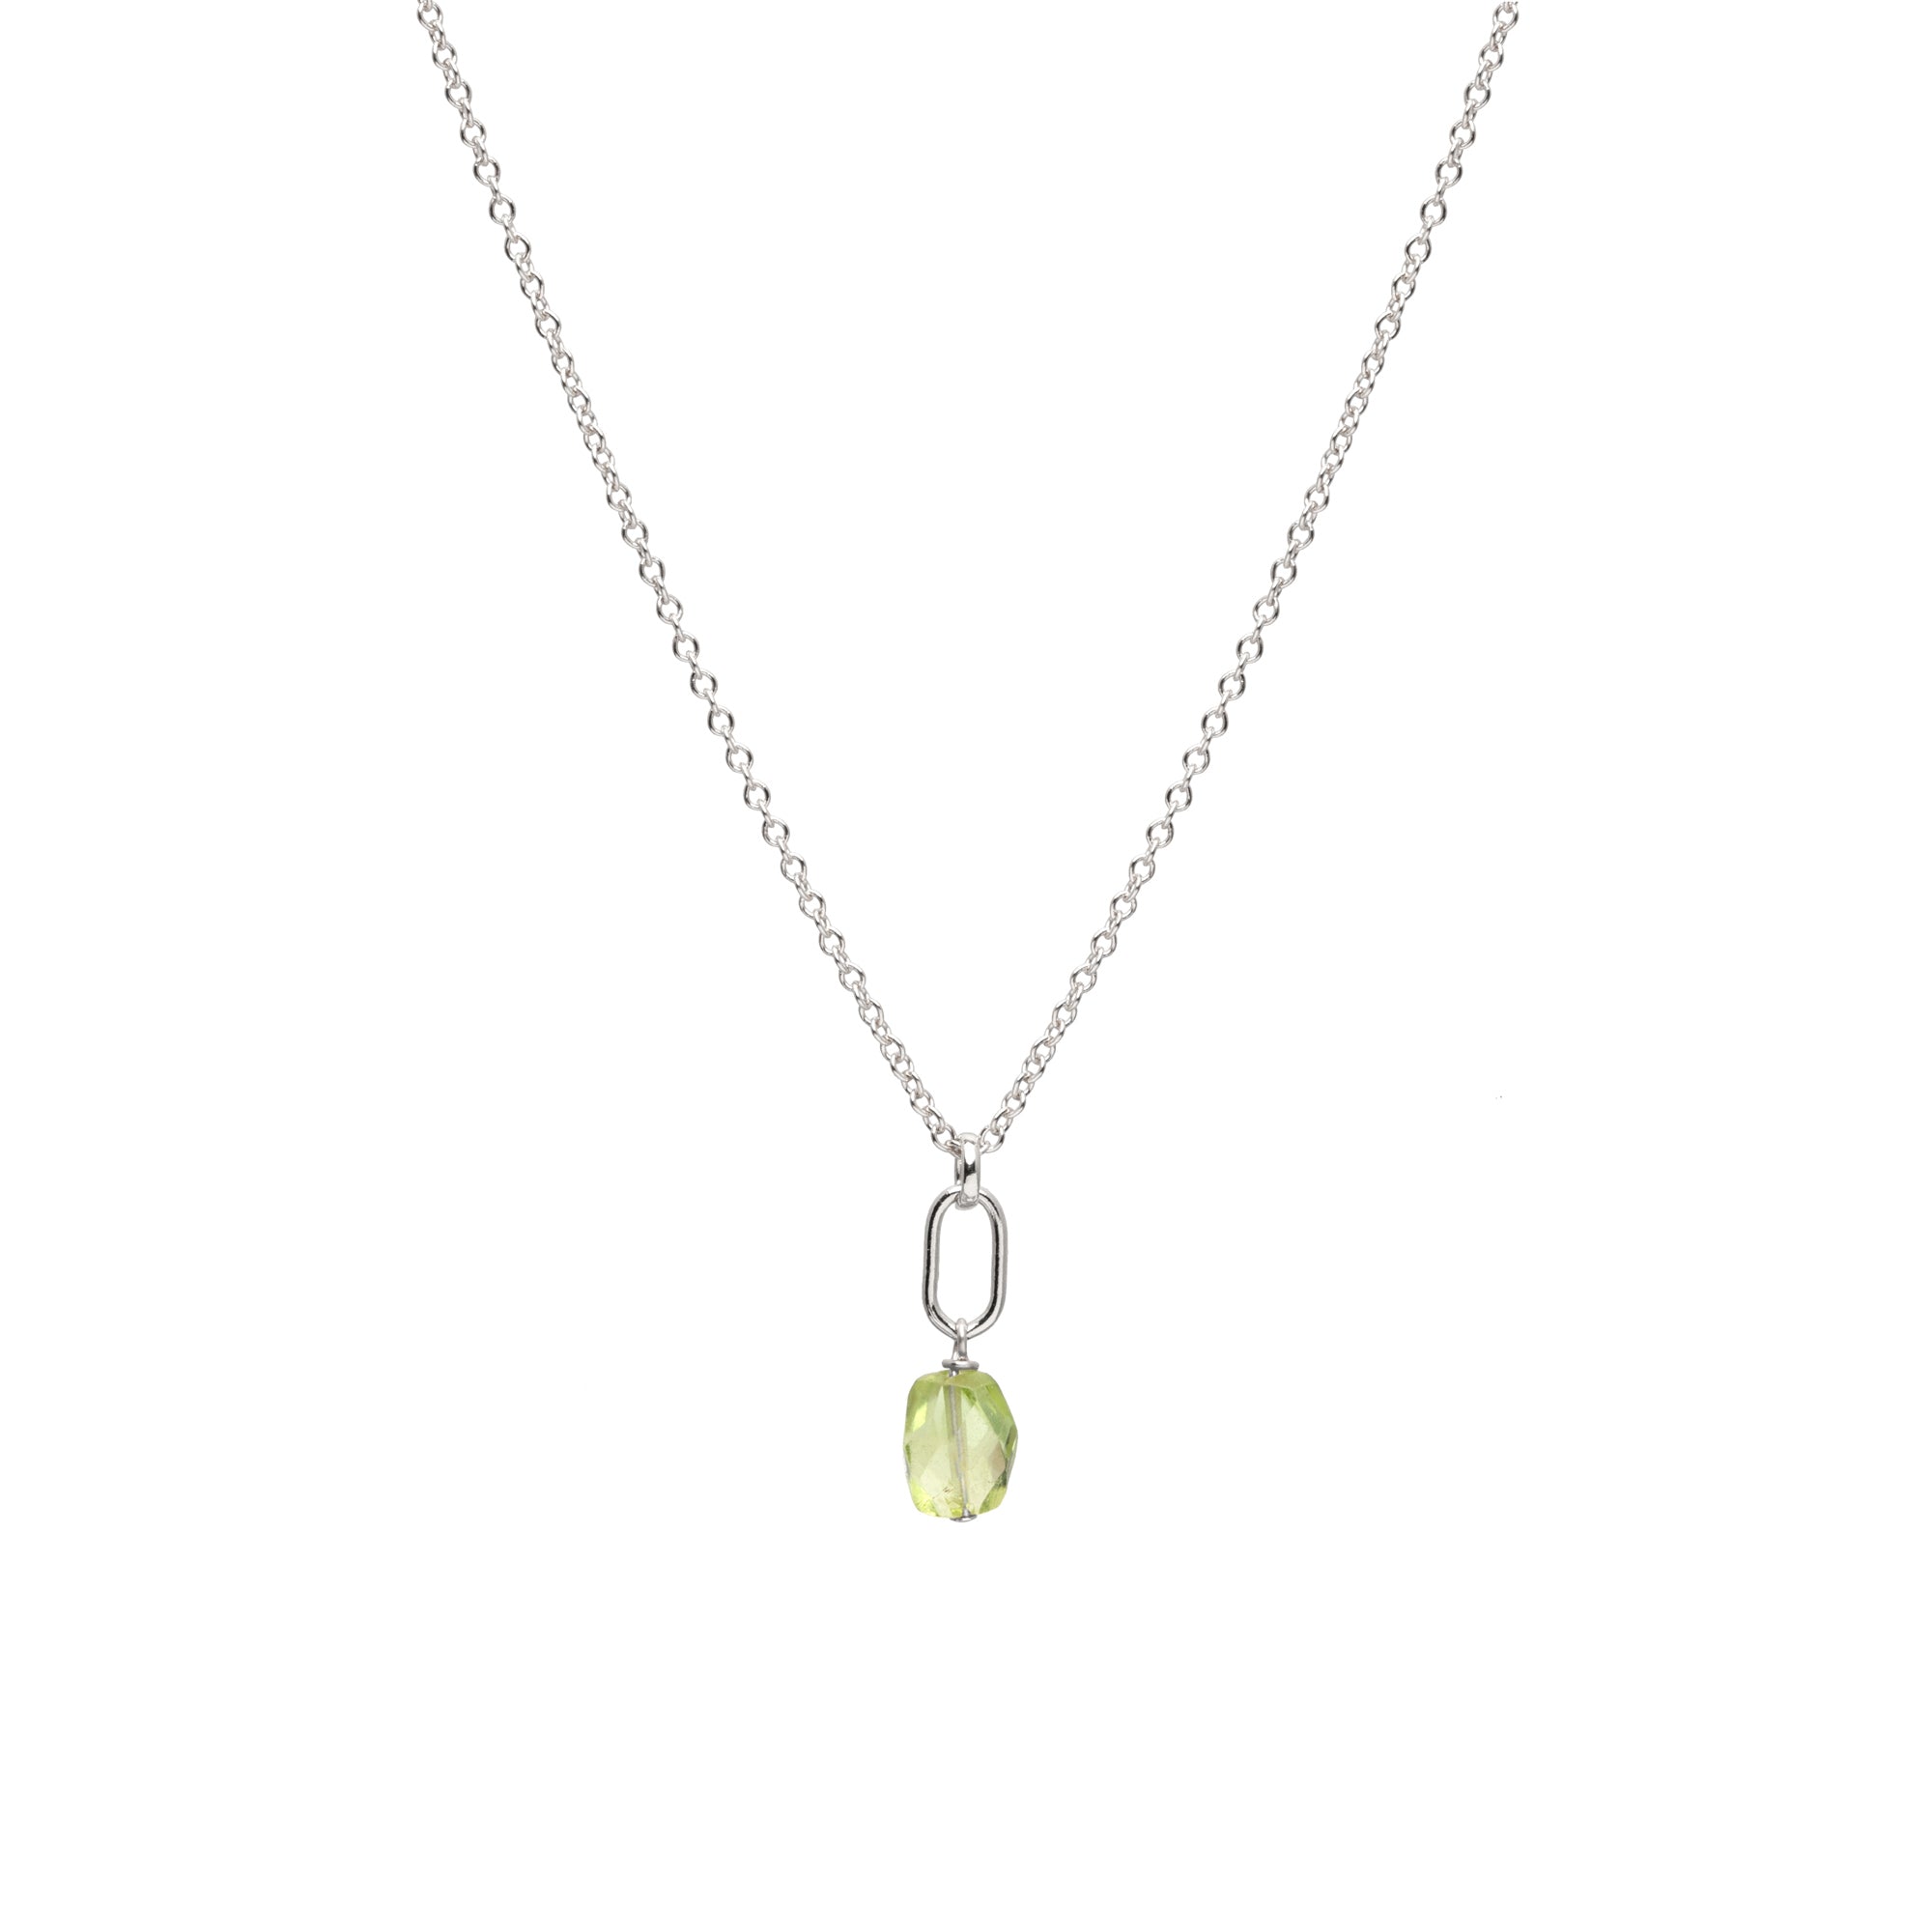 Natural PERIDOT Necklace Genuine Crystal Peridot Gemstone Bar Necklace,  Stone of Luck, Prosperity, Gift for Men & Women Minimalist Jewelry - Etsy